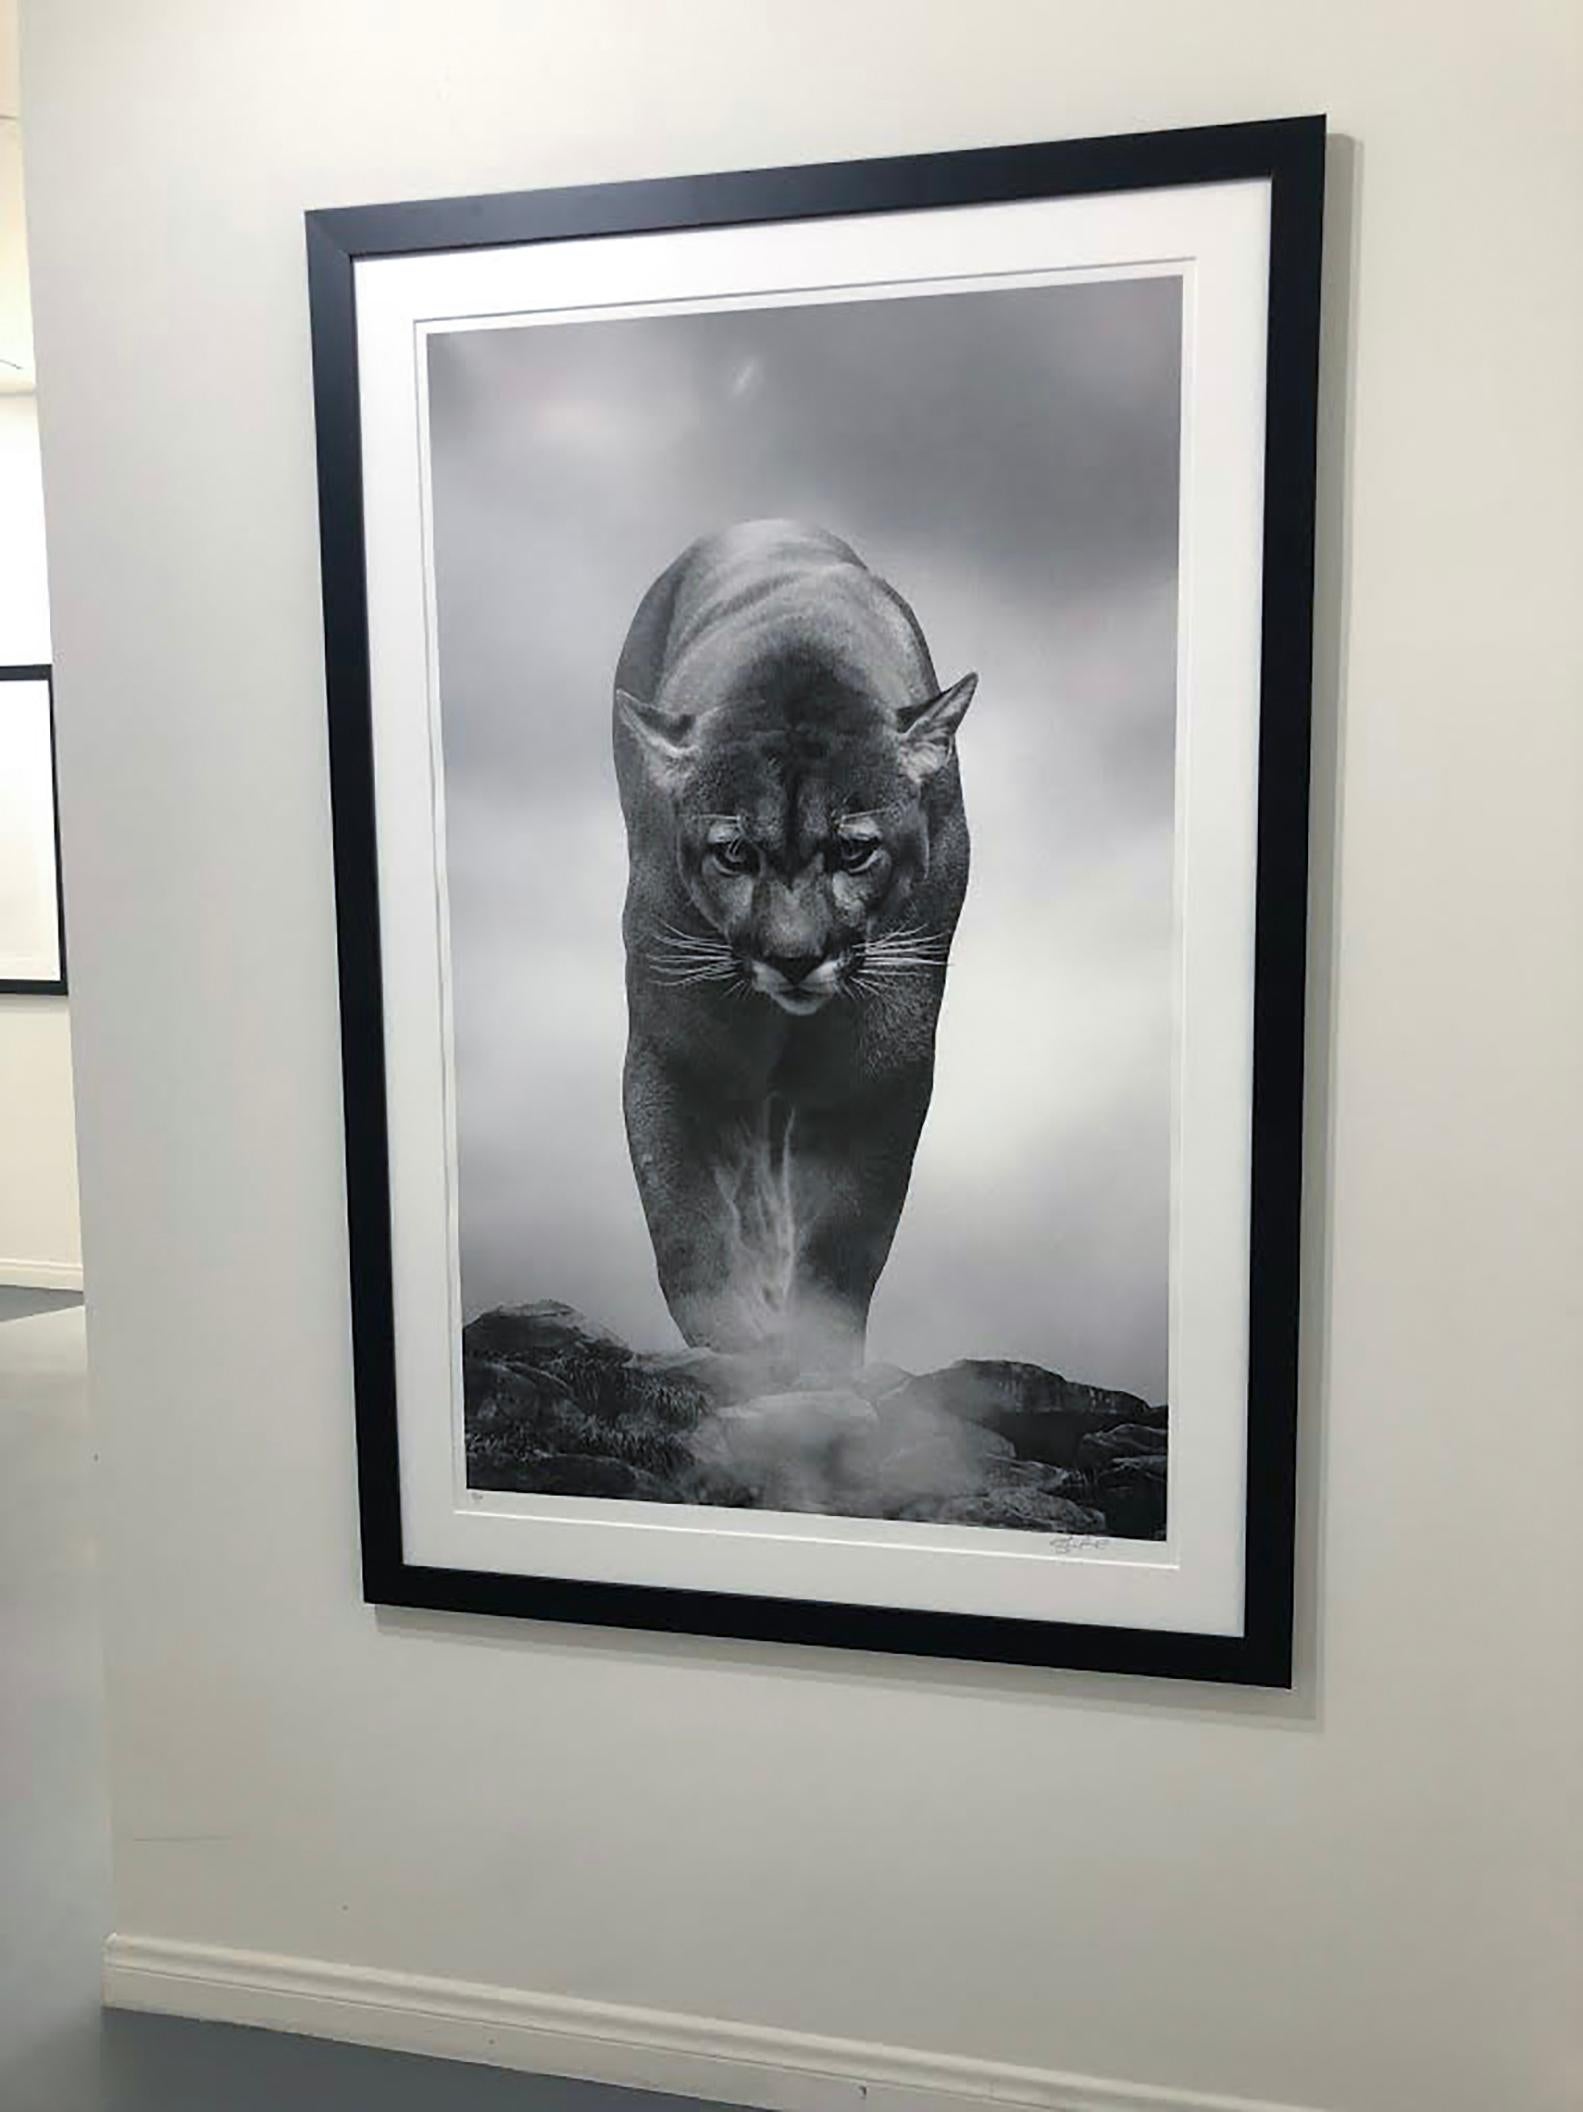  36x48 Unsigned Test Print  Photography, Cougar, Mountain Lion Western Art - Gray Landscape Photograph by Shane Russeck